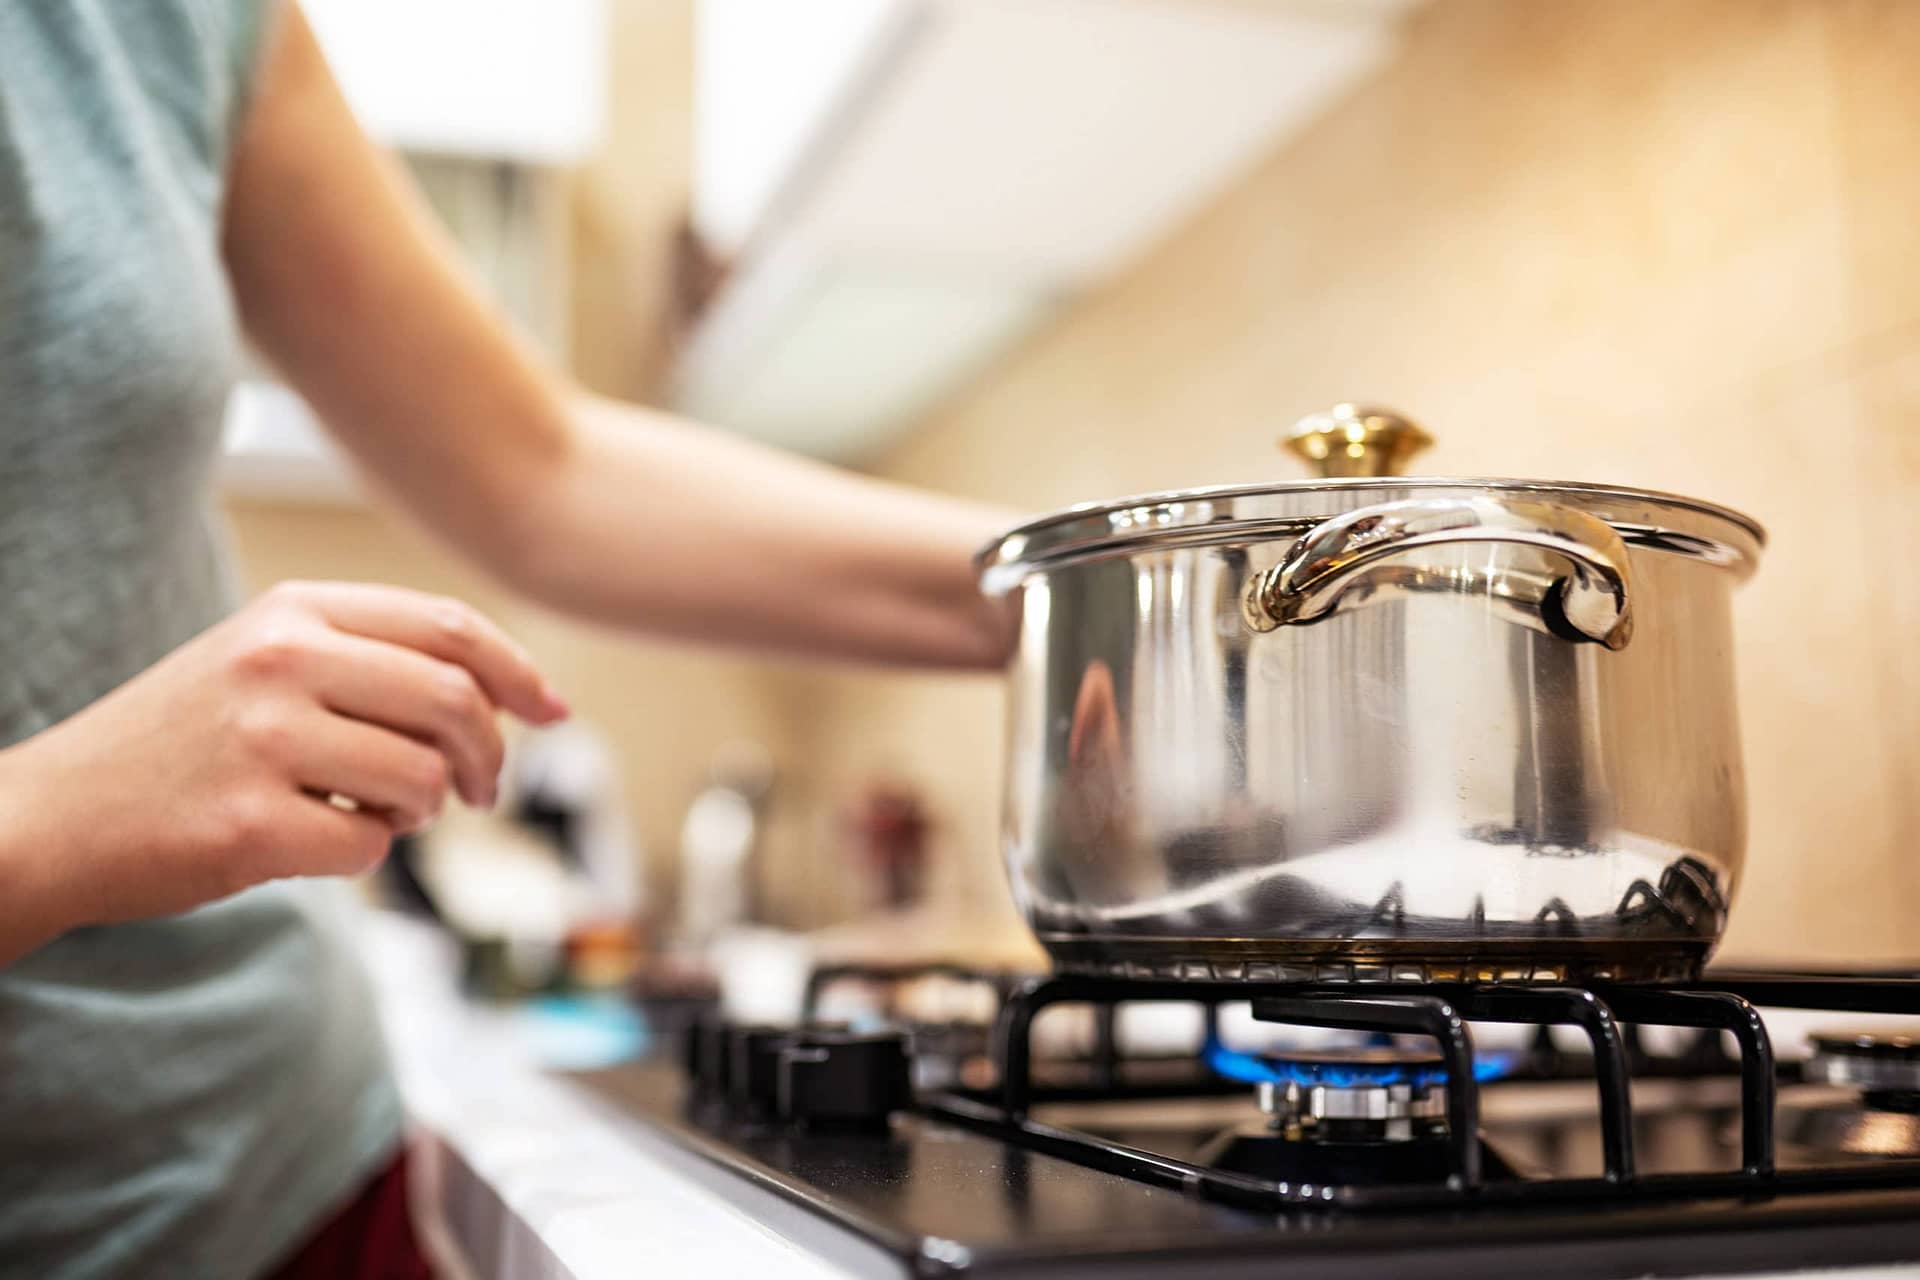 Stove Keeps Clicking: 5 Easy Ways To Fix The Problem Now